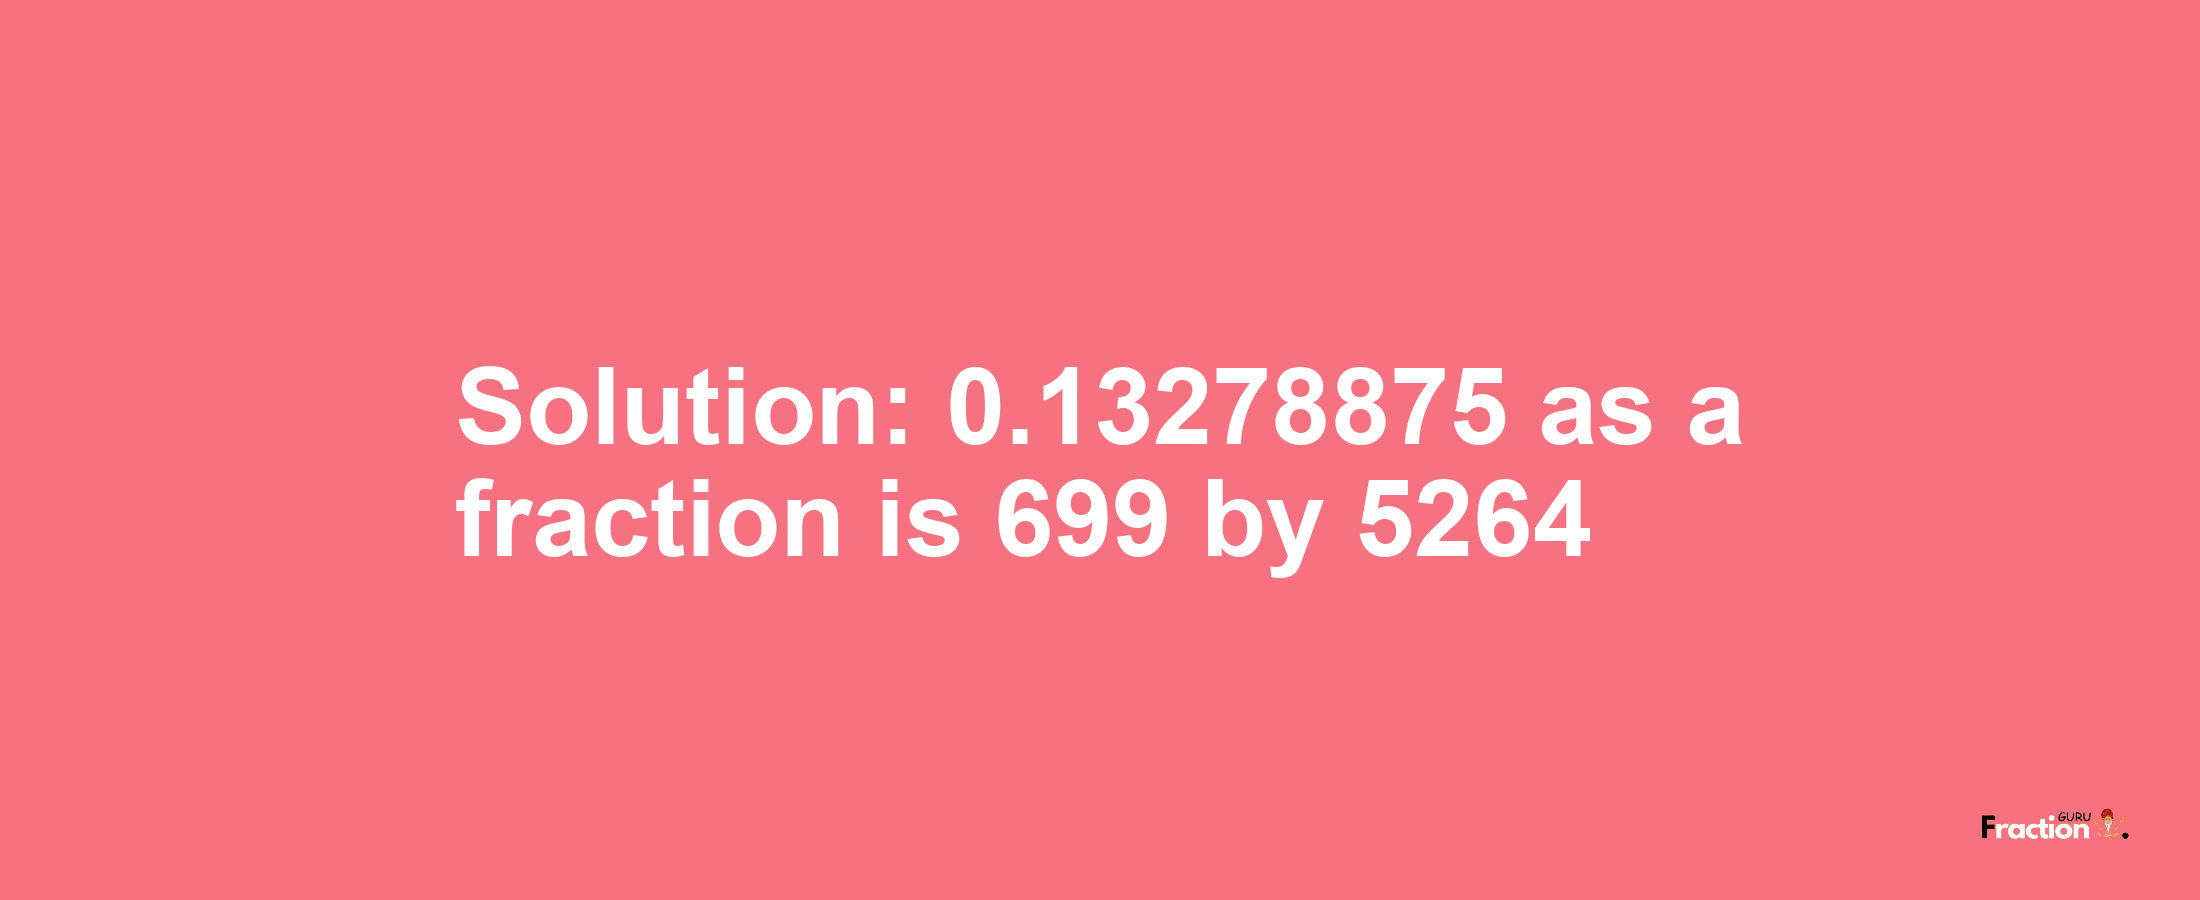 Solution:0.13278875 as a fraction is 699/5264